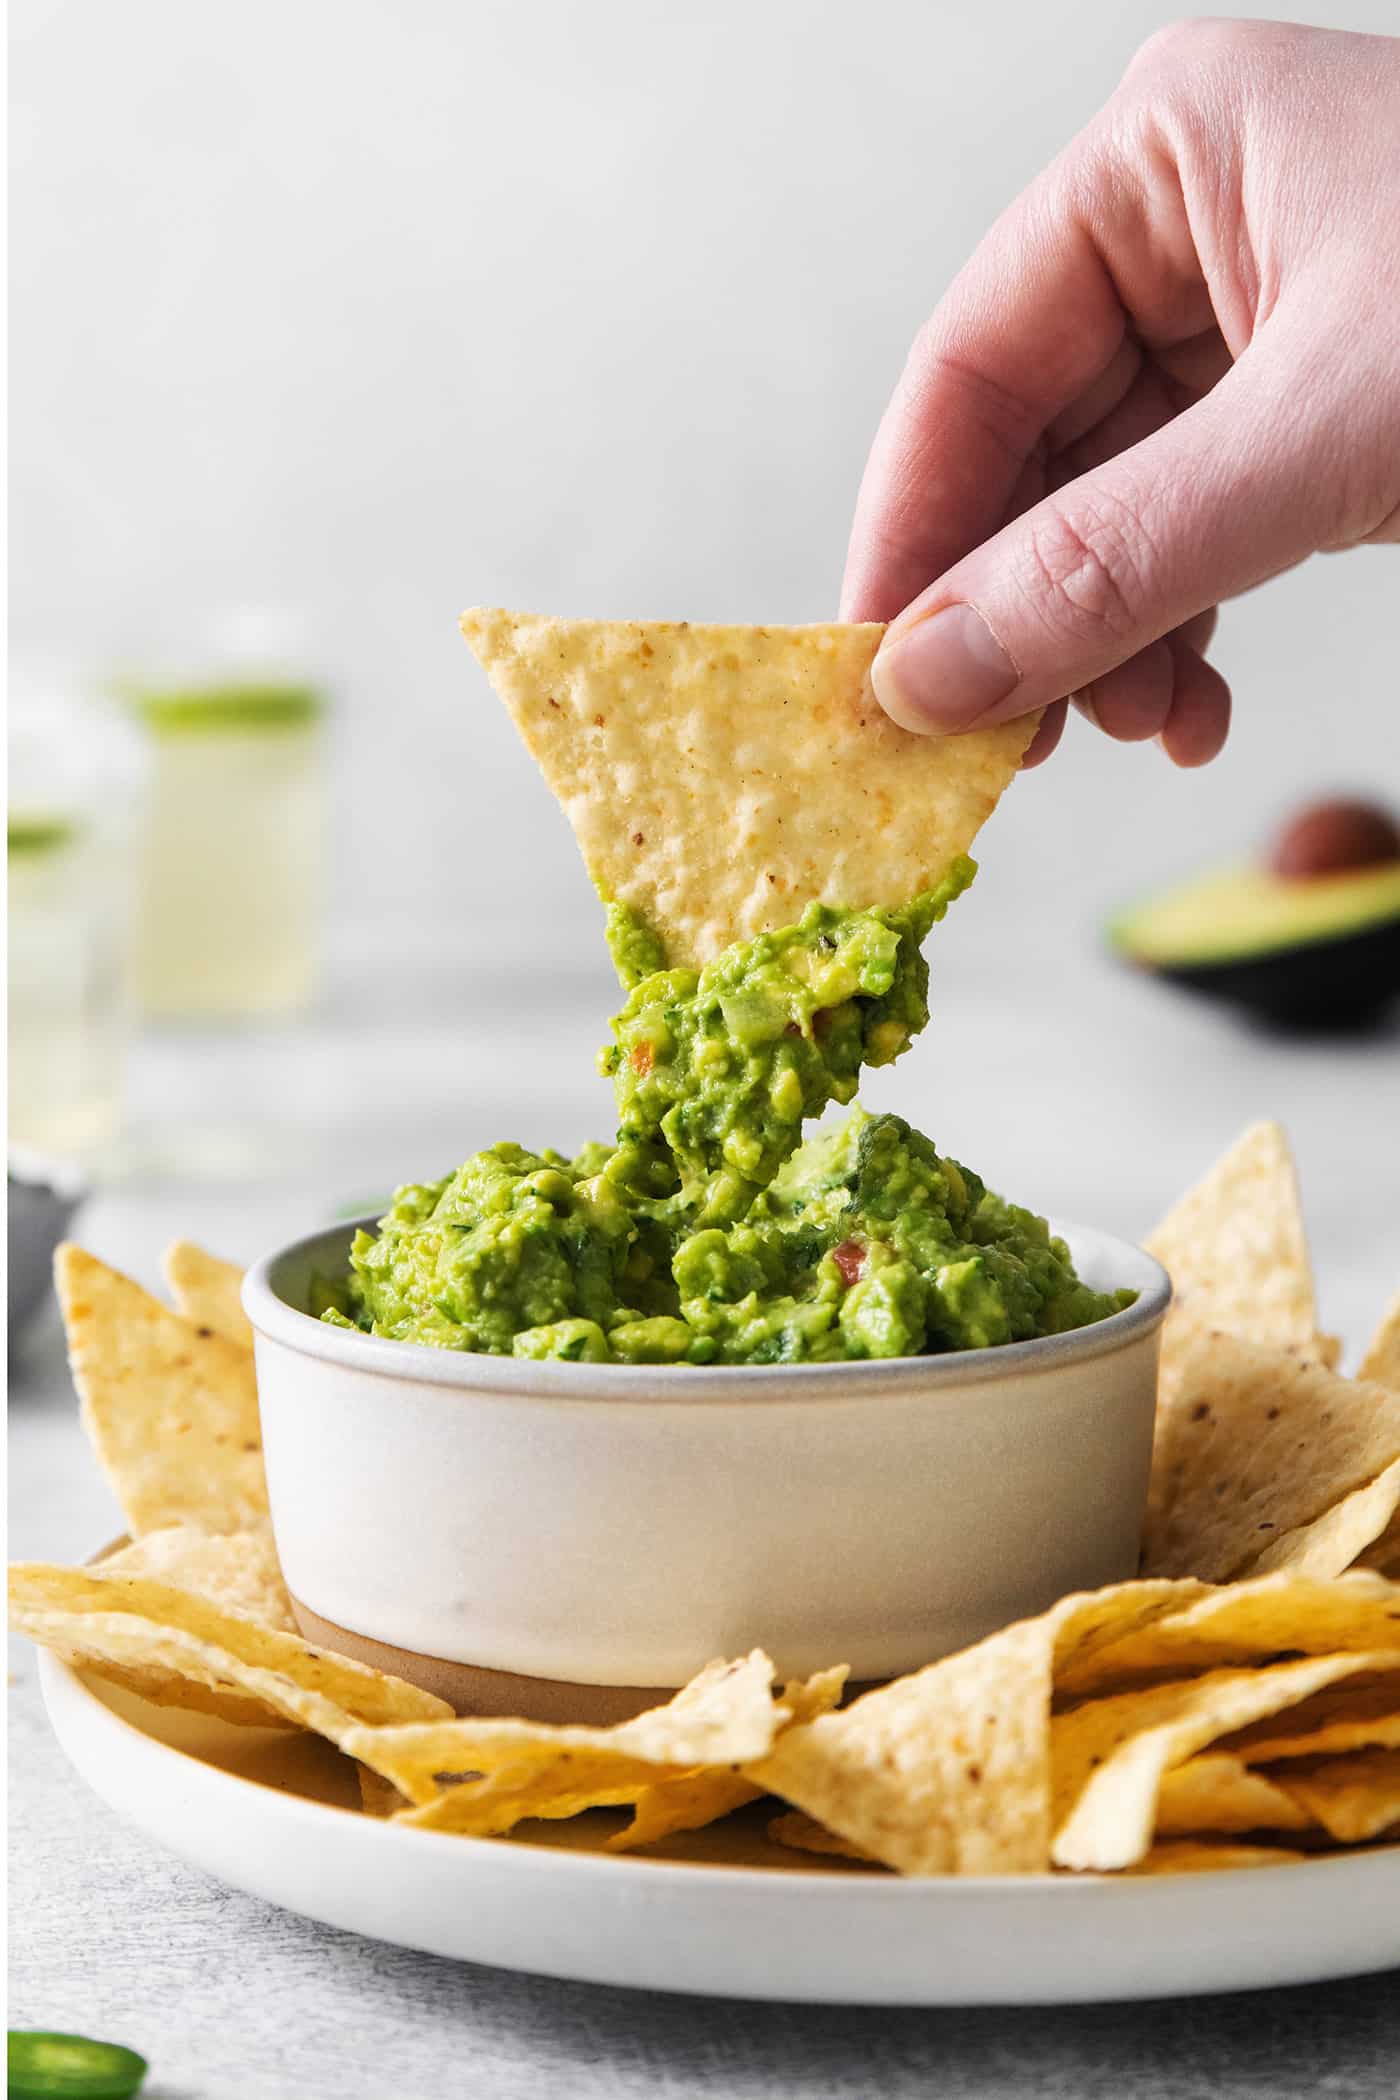 A hand dipping a chip into some fresh guacamole